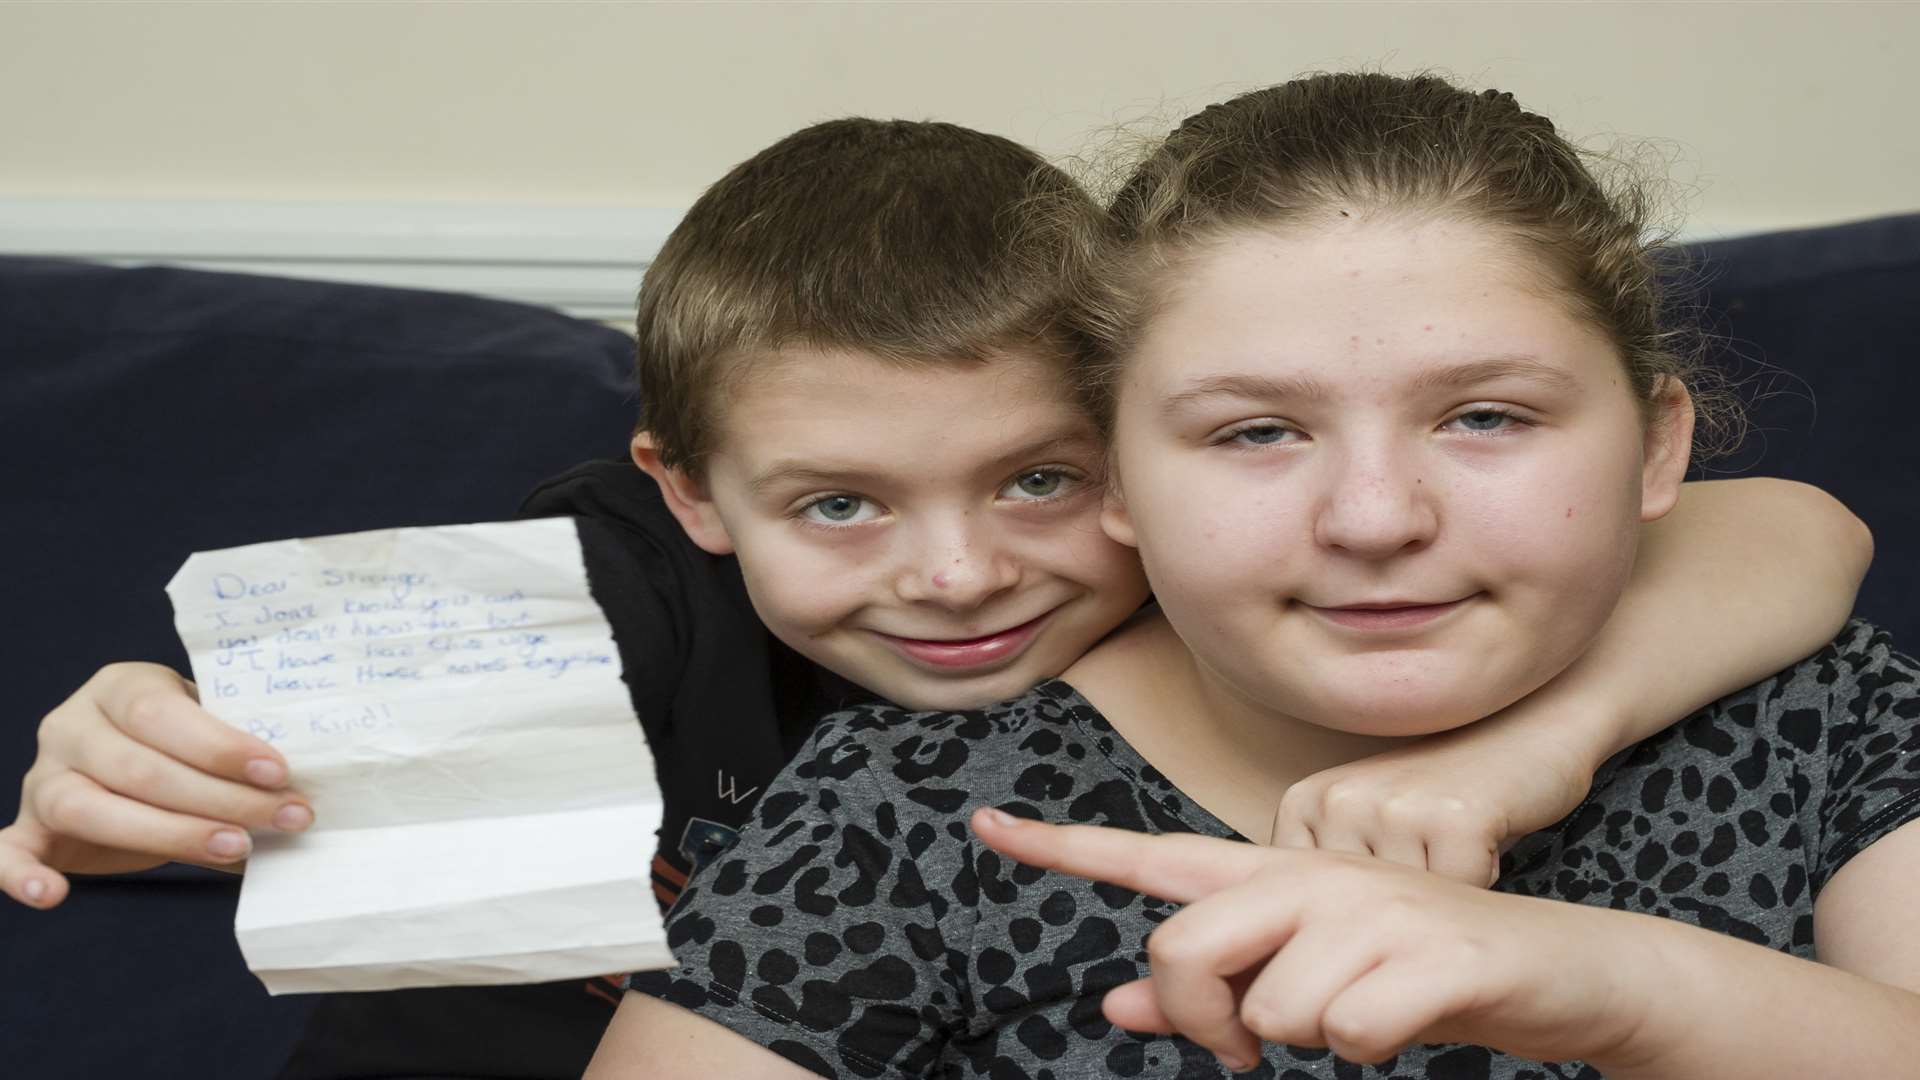 Michael Strevens, 8, with Jess, 10